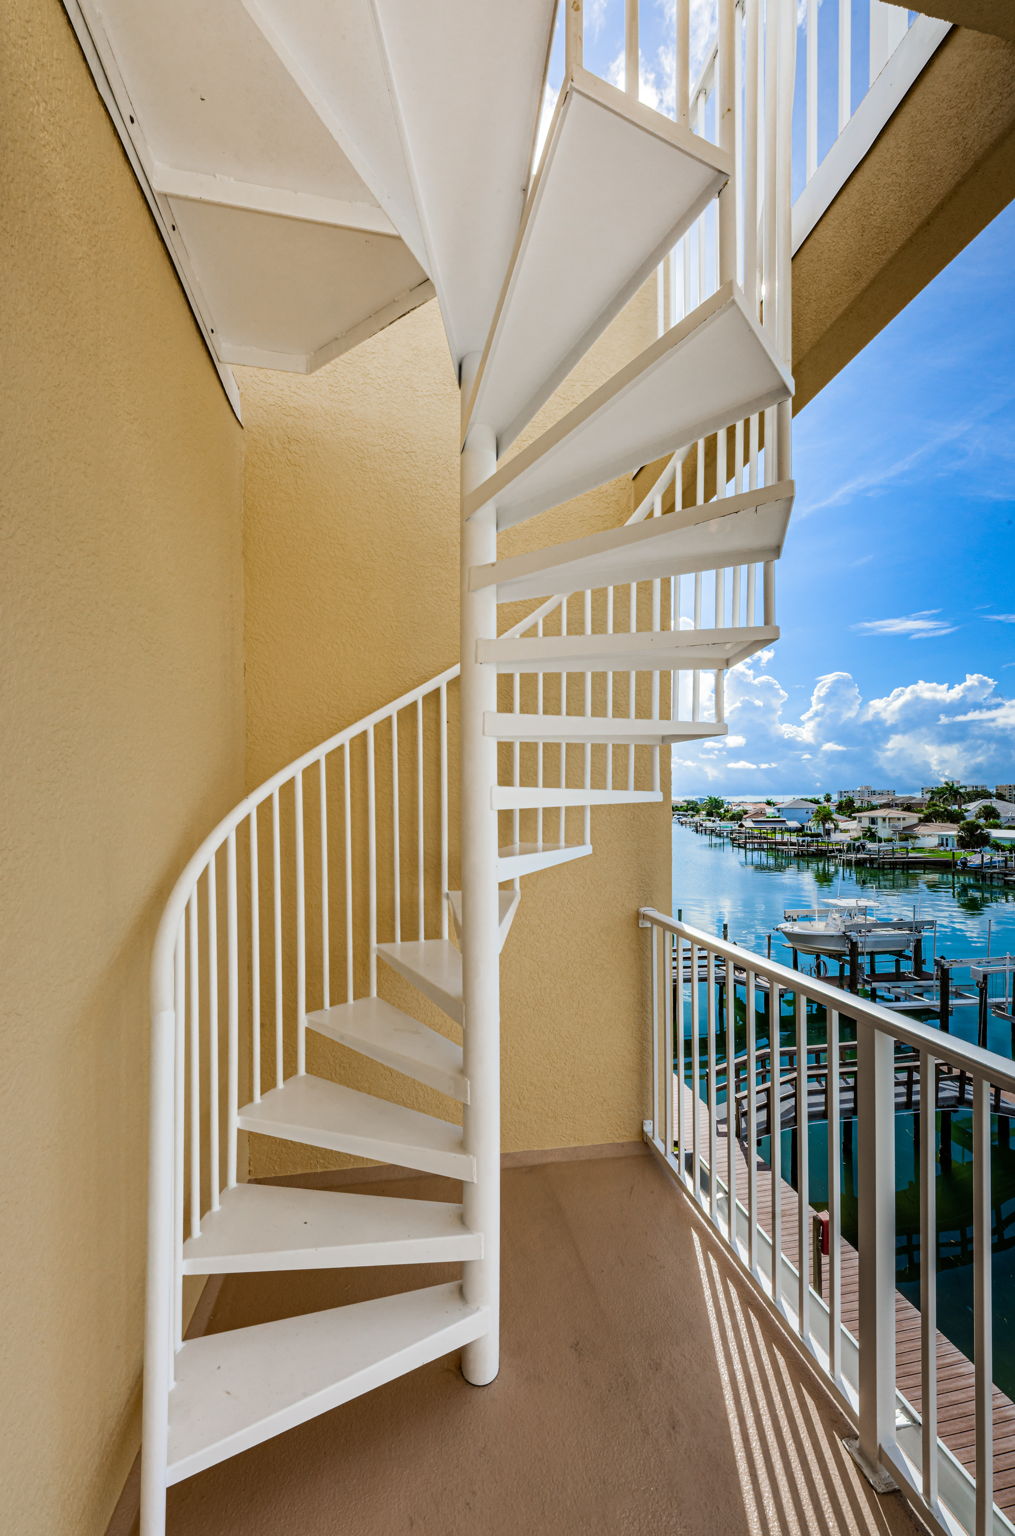 Staircase to Rooftop Patio